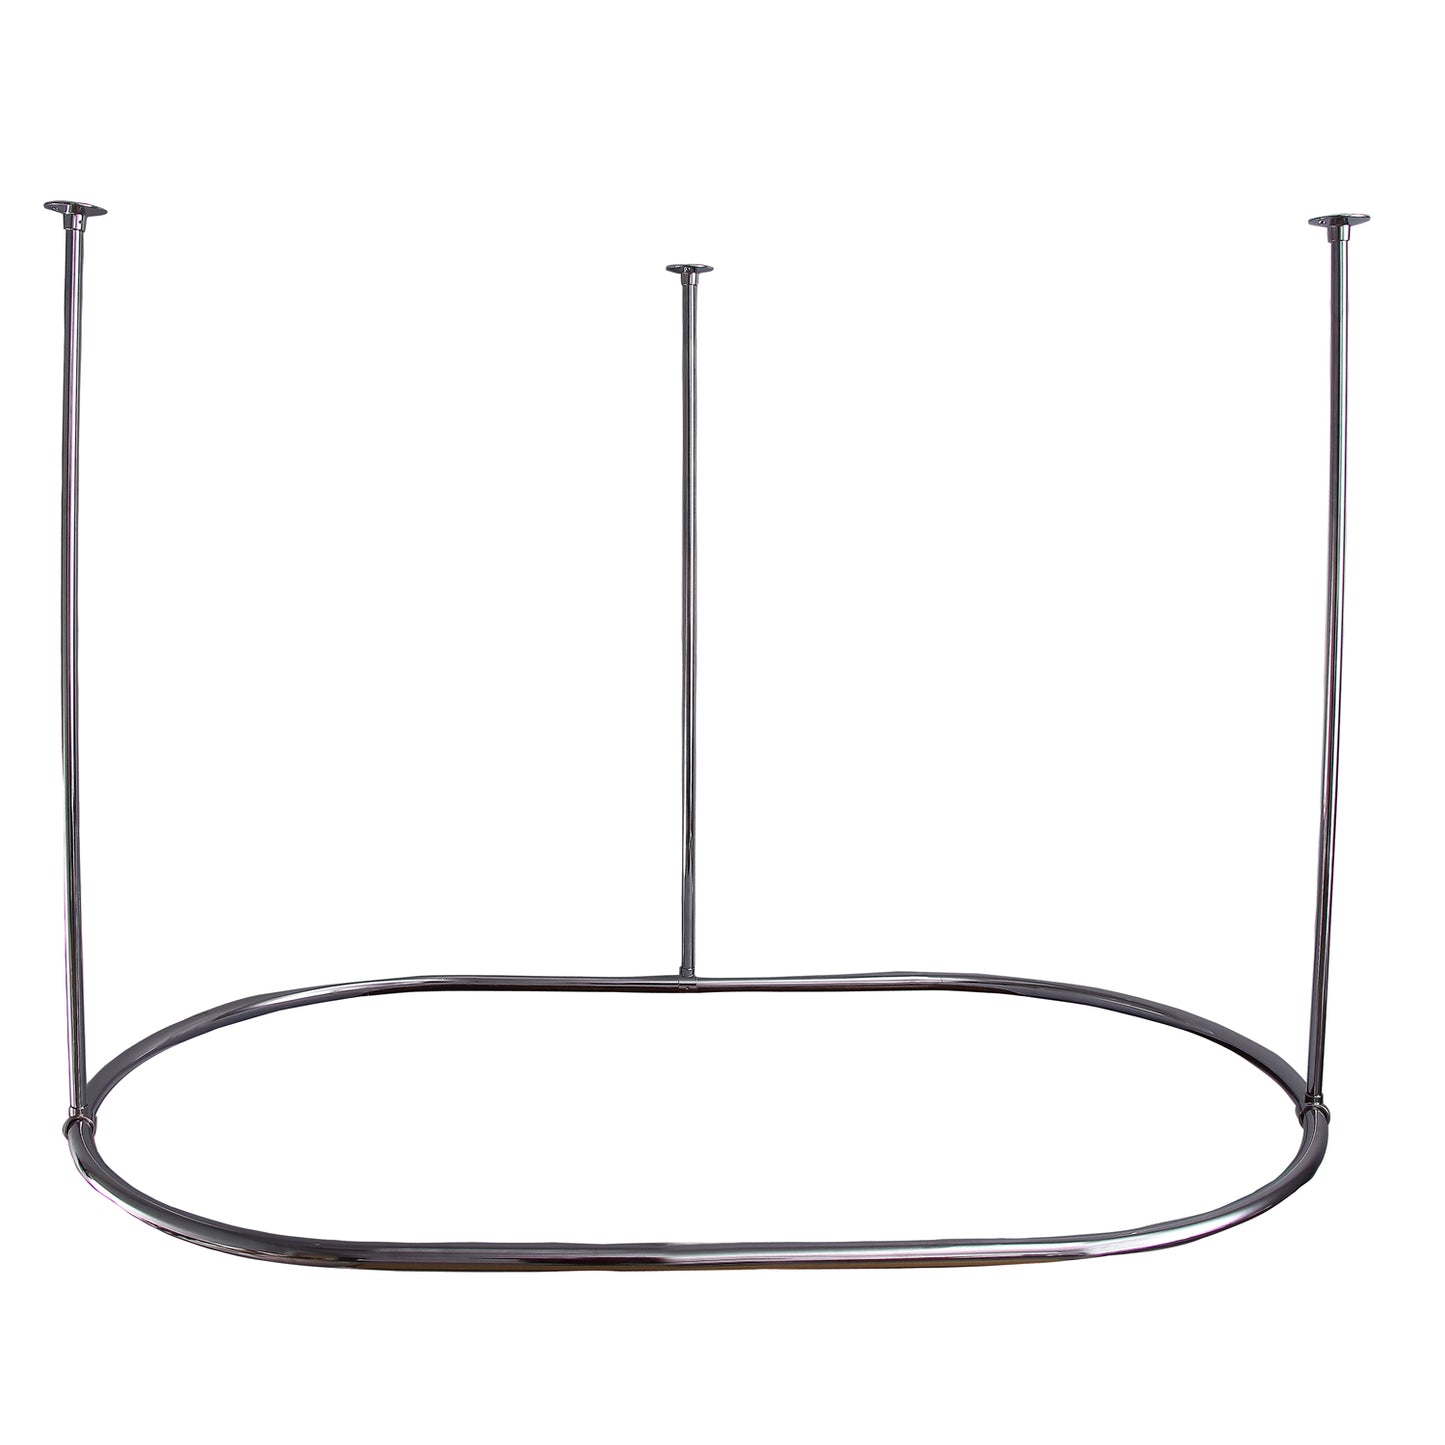 60" x 36" Oval Shower Curtain Ring in Chrome